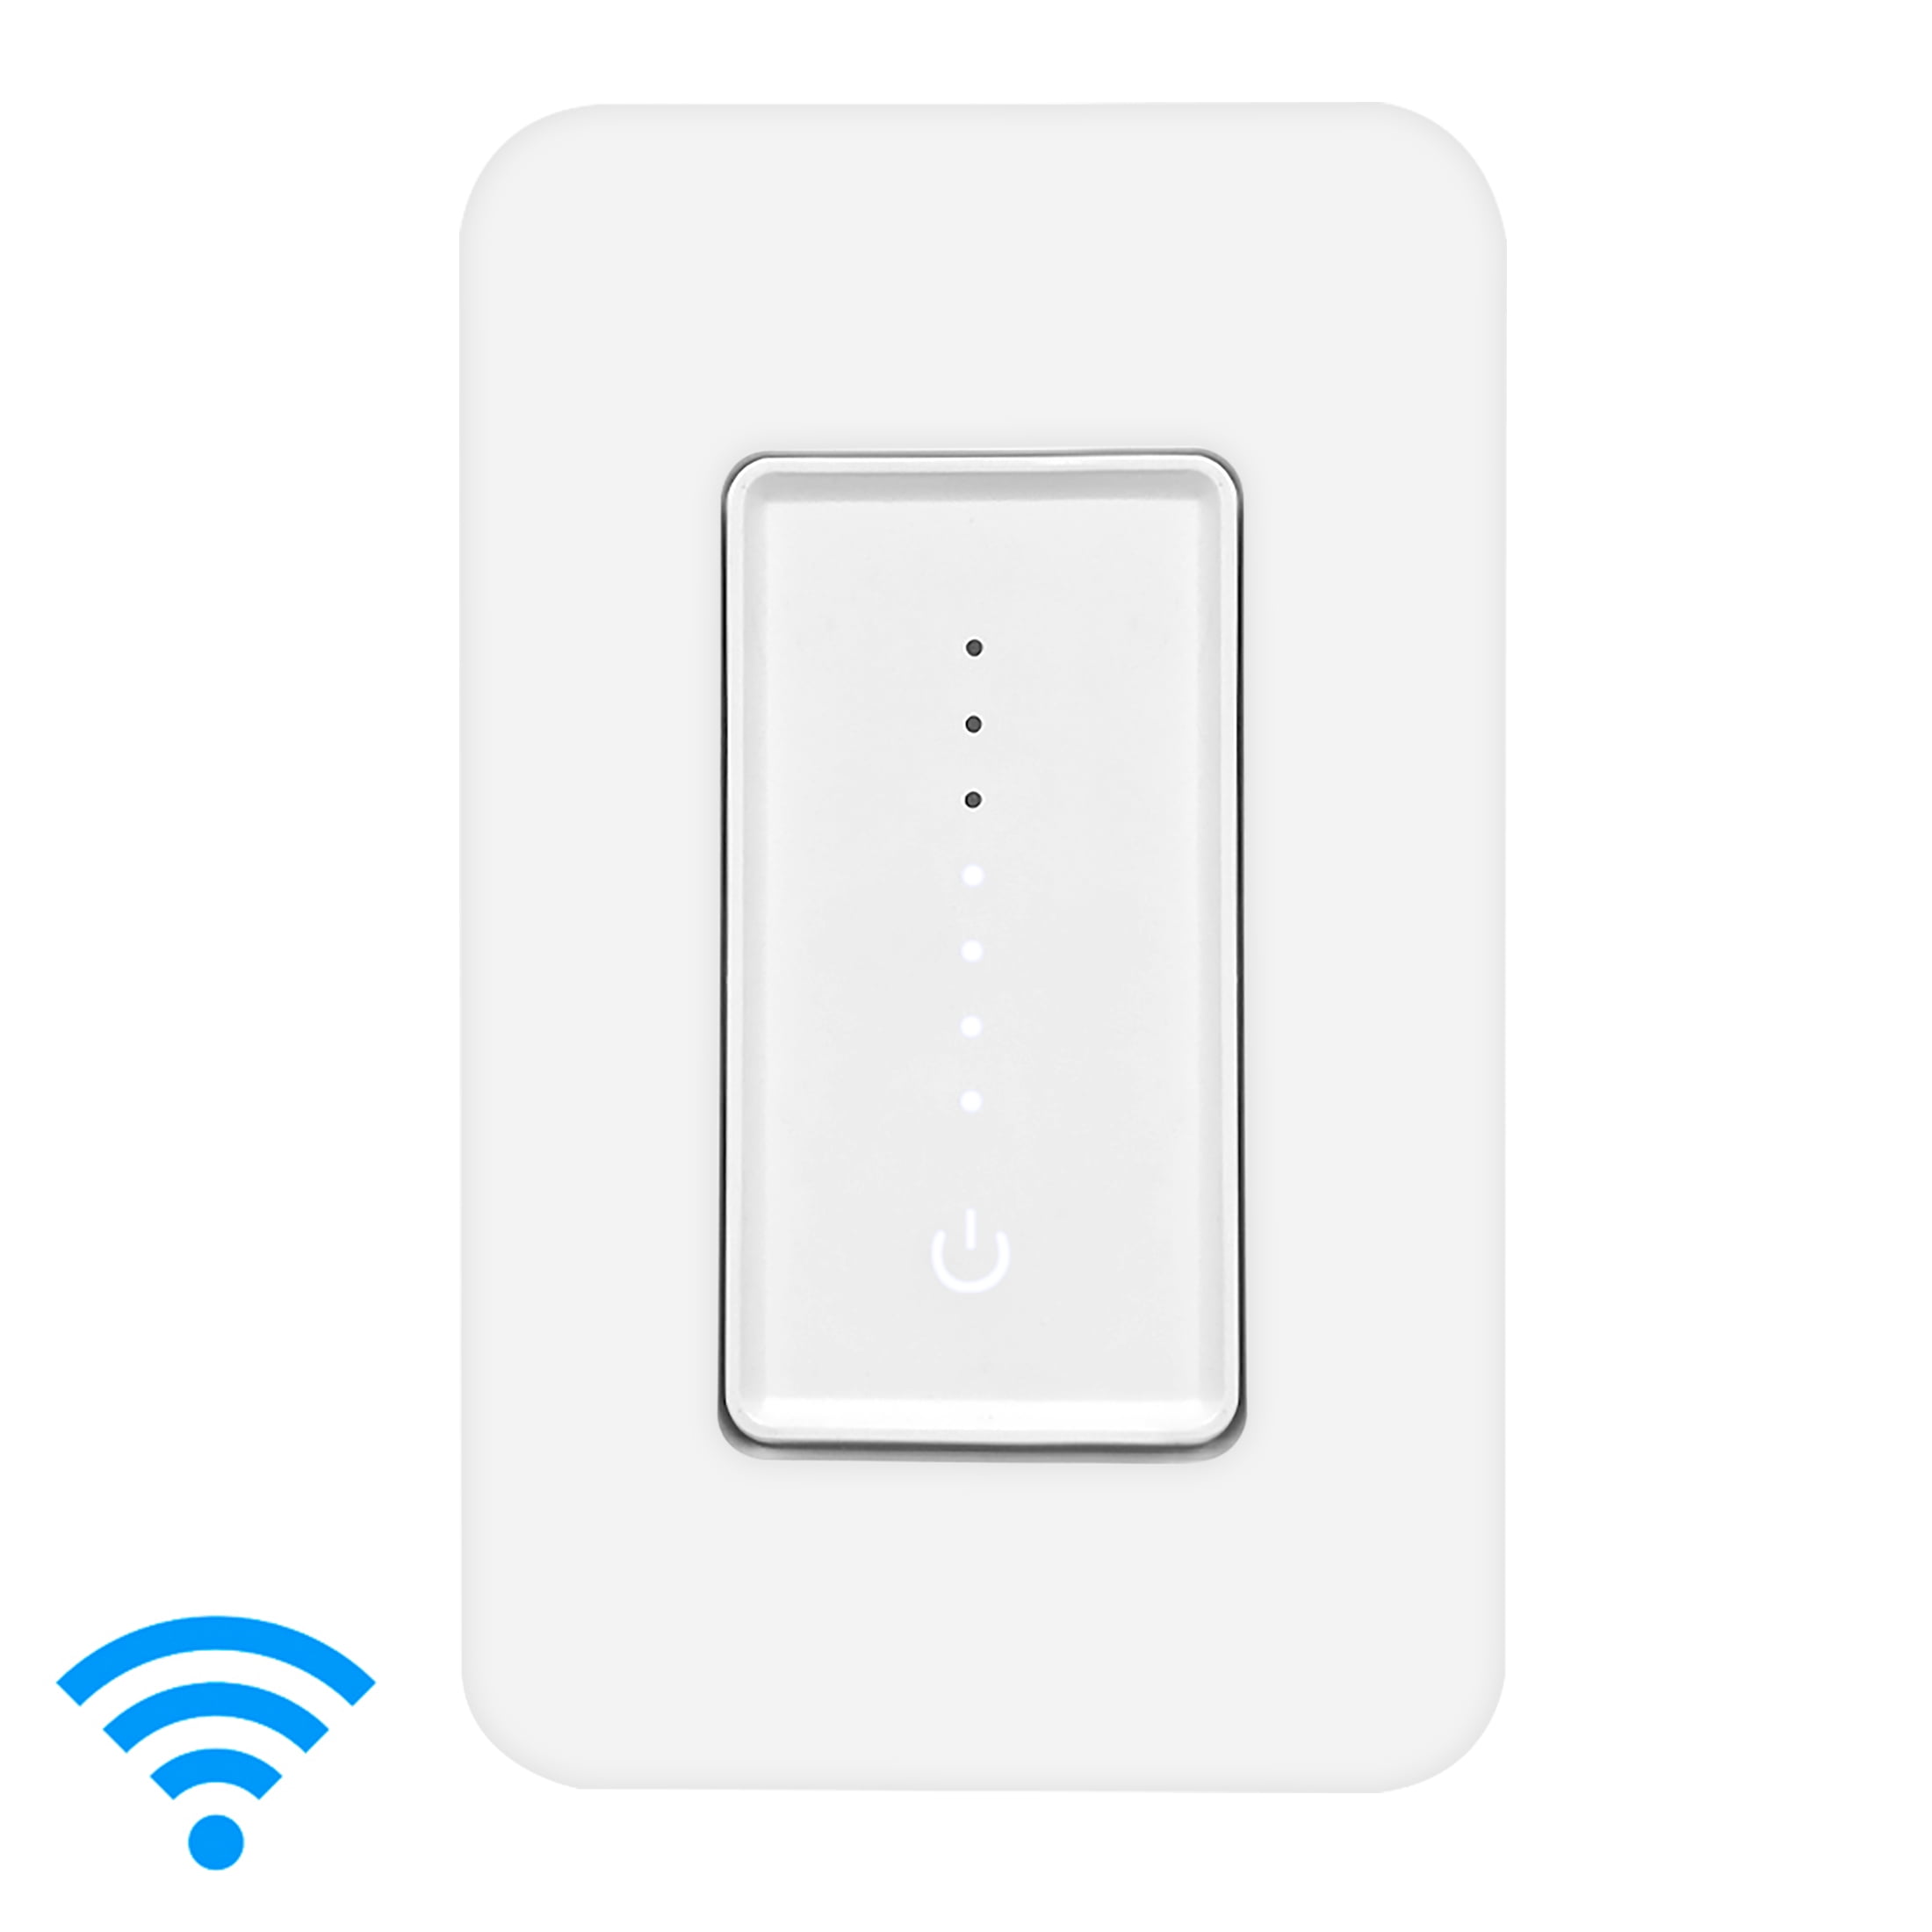 Smart WiFi Digital Dimmer Switch, 3-Way/Single Pole Electrical Light Switch w/ LED Indicator Lights, Voice Control Compatible w/ Alexa & Google Home, 250W, Screwless Wall Plate Incl, by Maxxima - Walmart.com